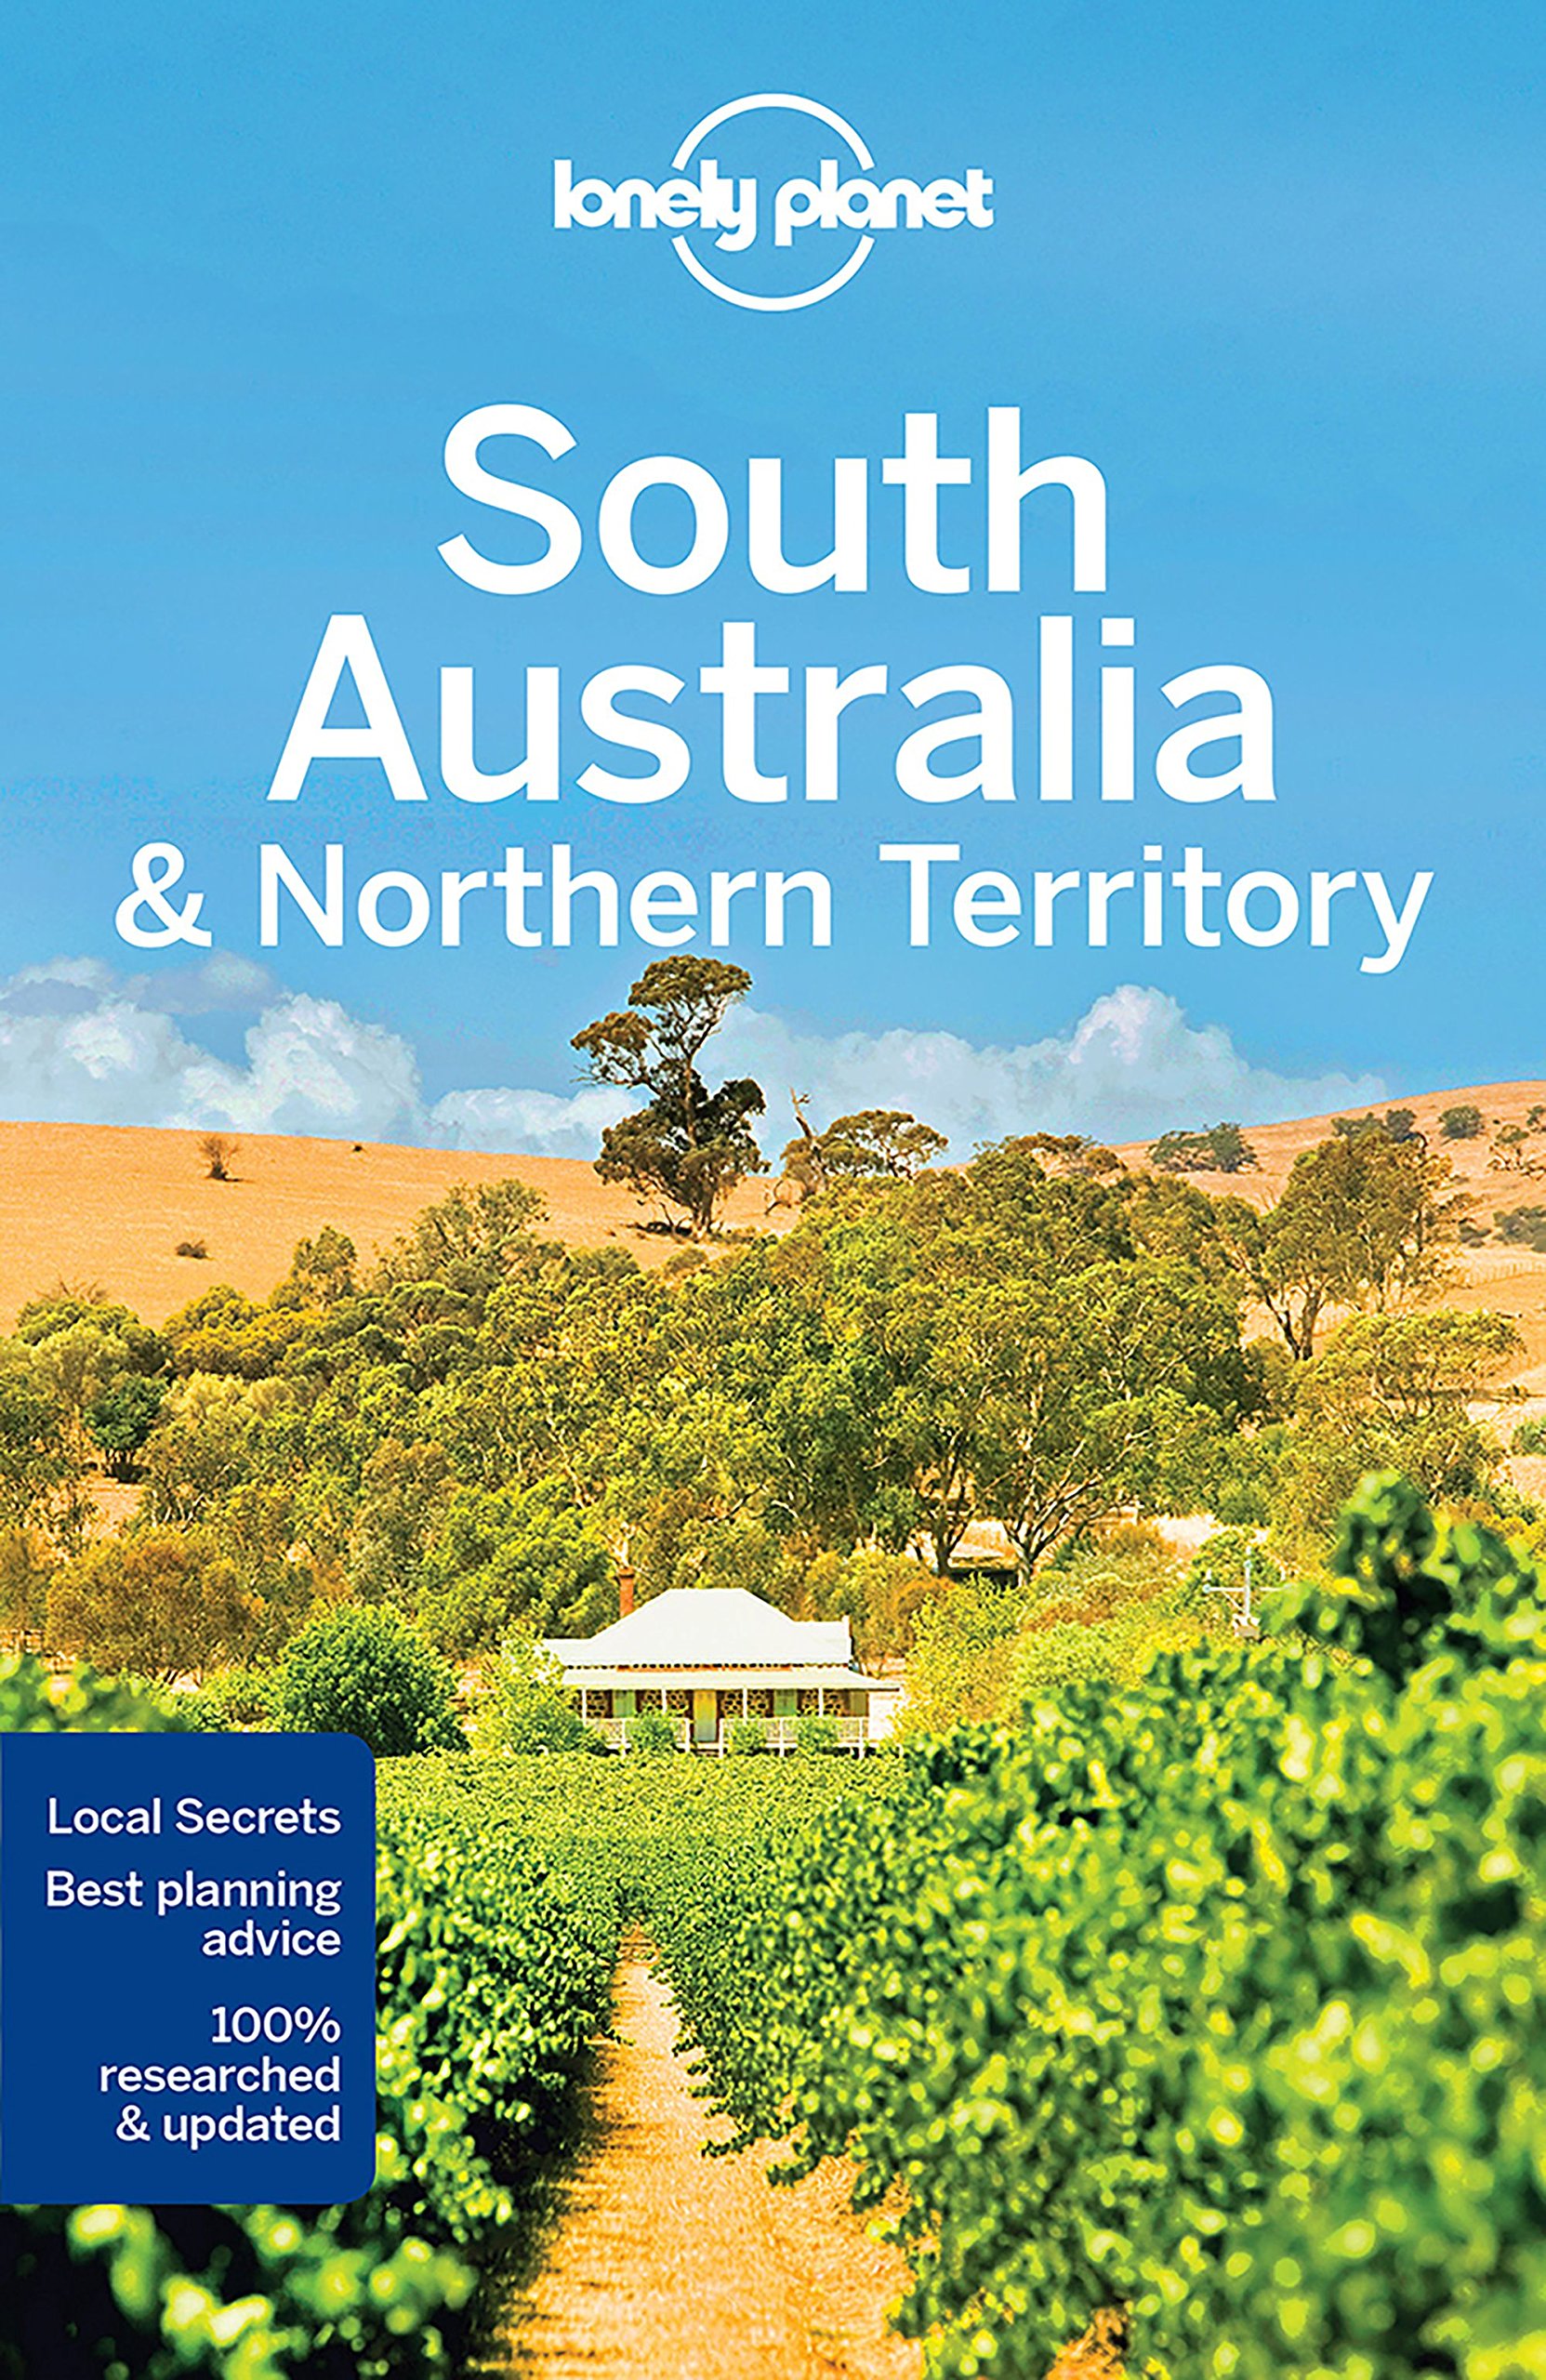 Lonely Planet South Australia & Northern Territory | Lonely Planet, Anthony Ham, Charles Rawlings-Way, Lonely Planet